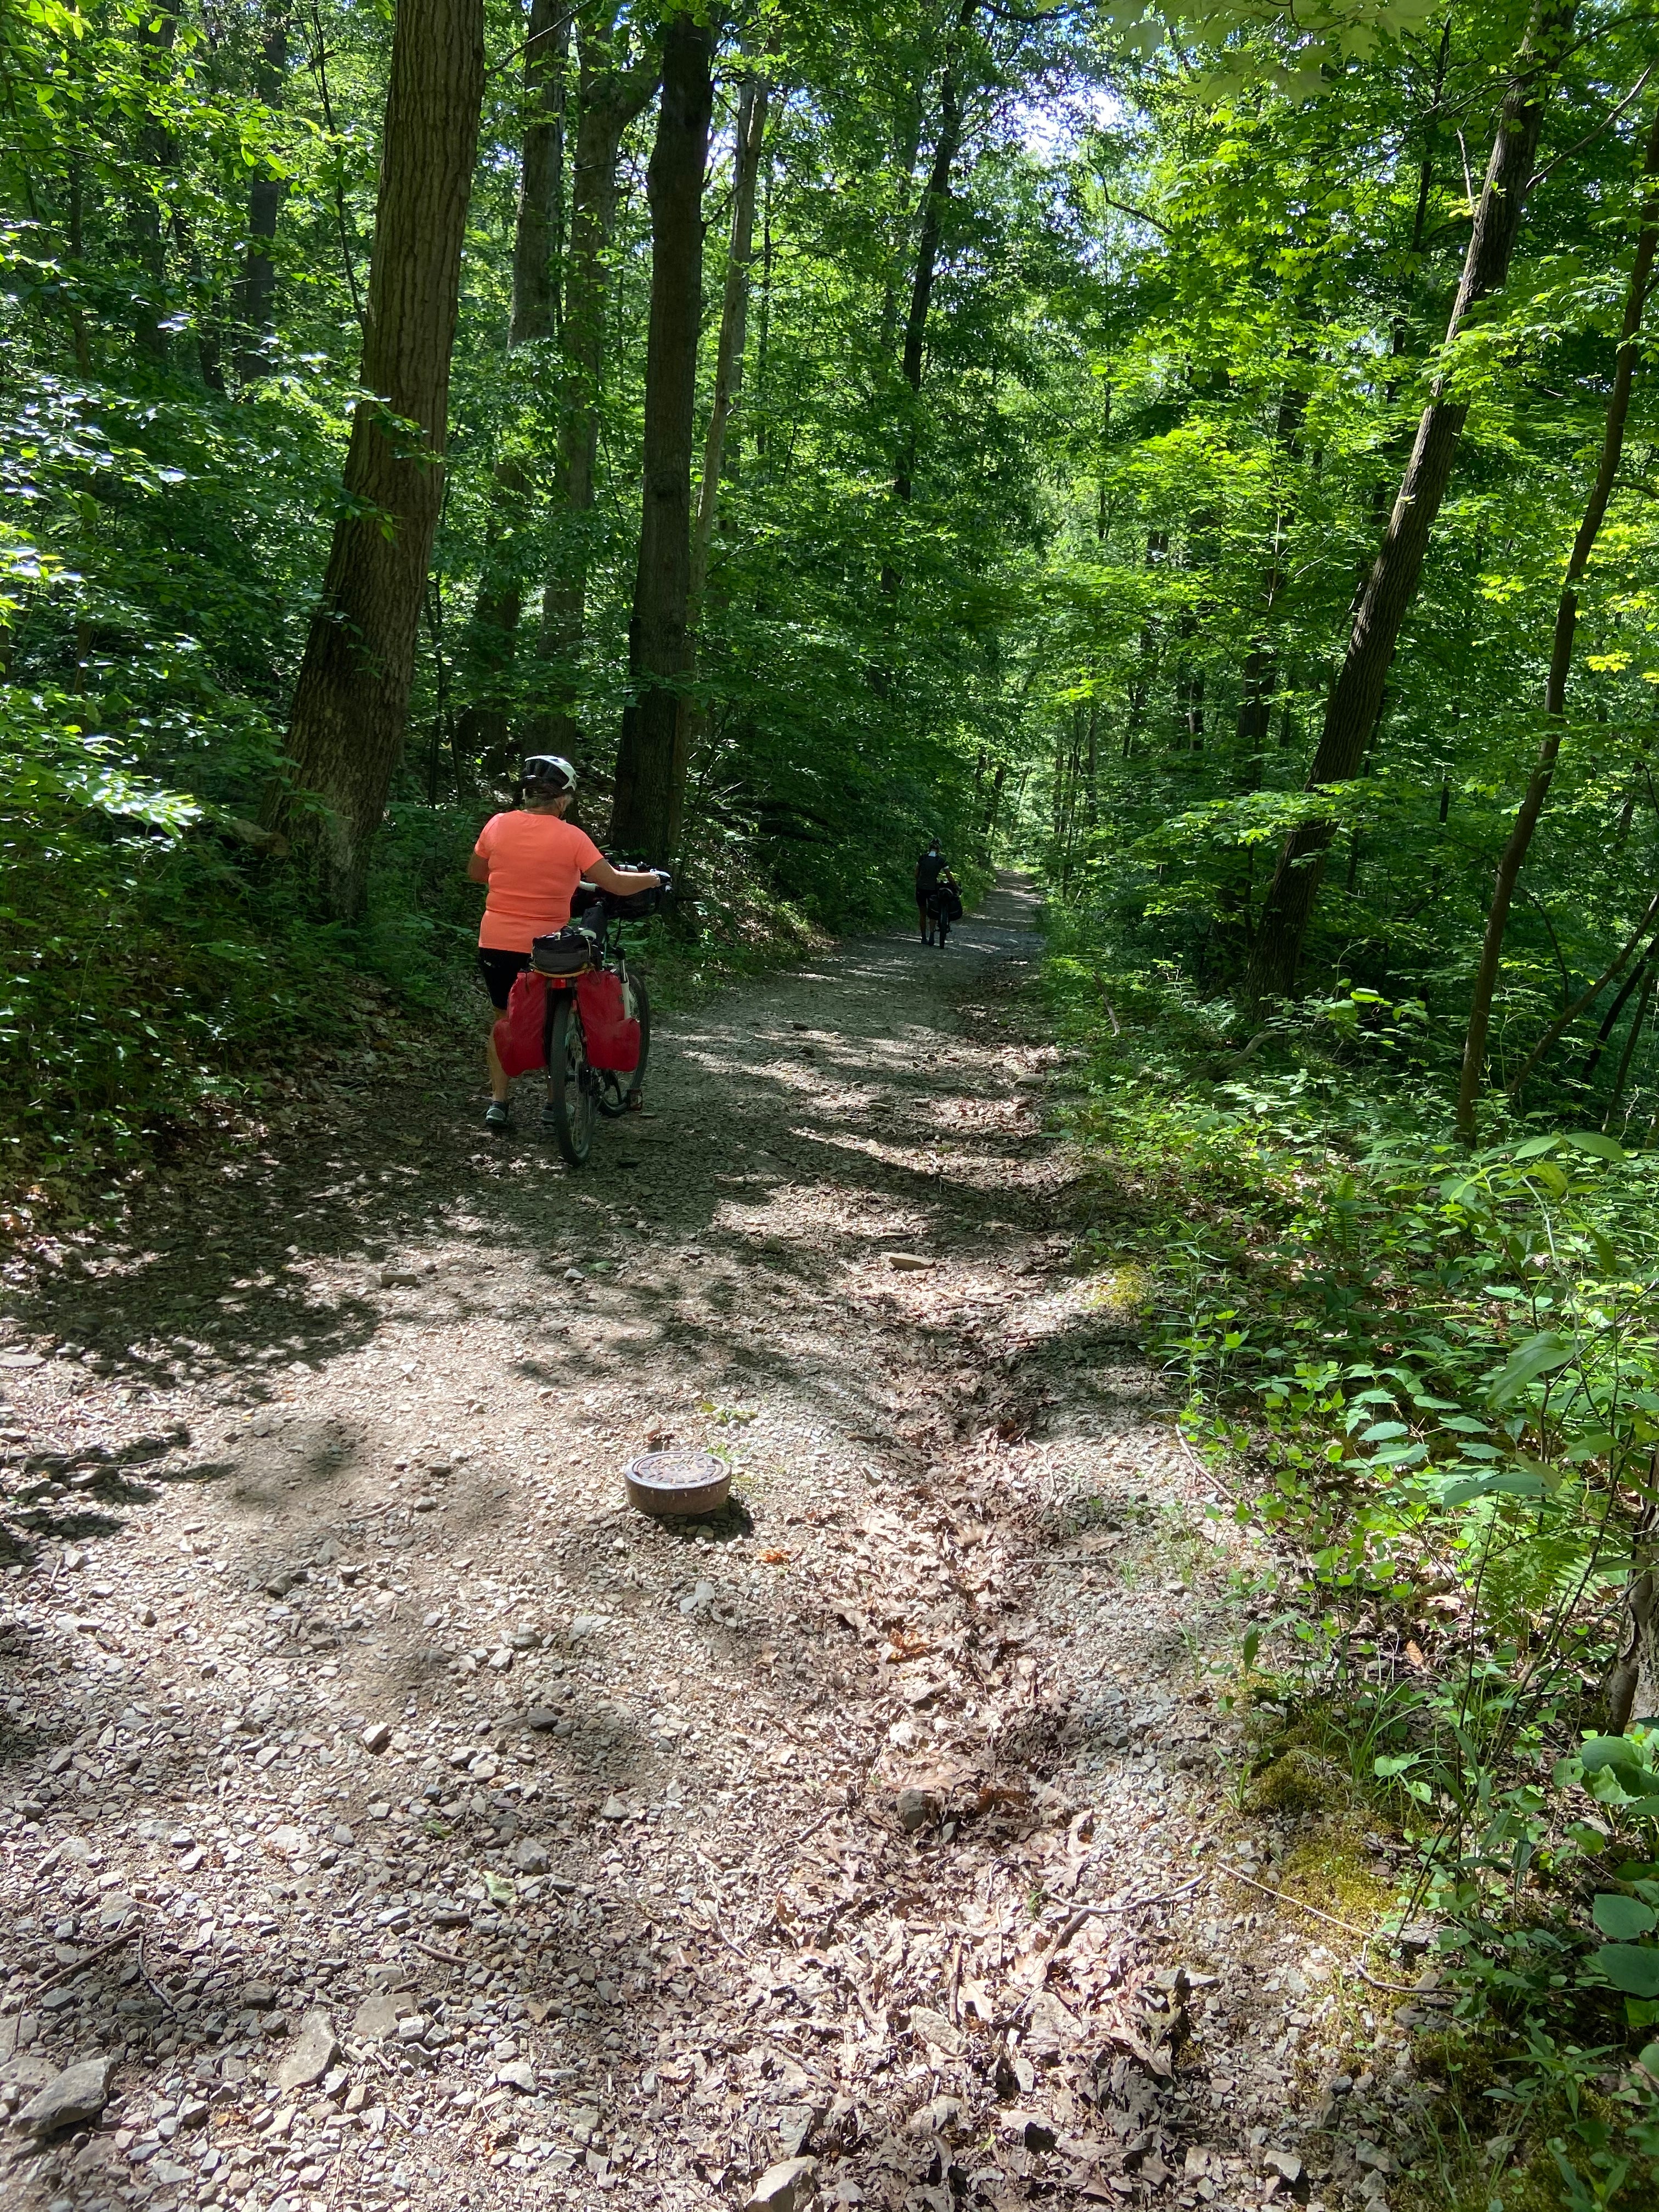 Squeezed brakes for the 1/4 mile down the Beech Trail